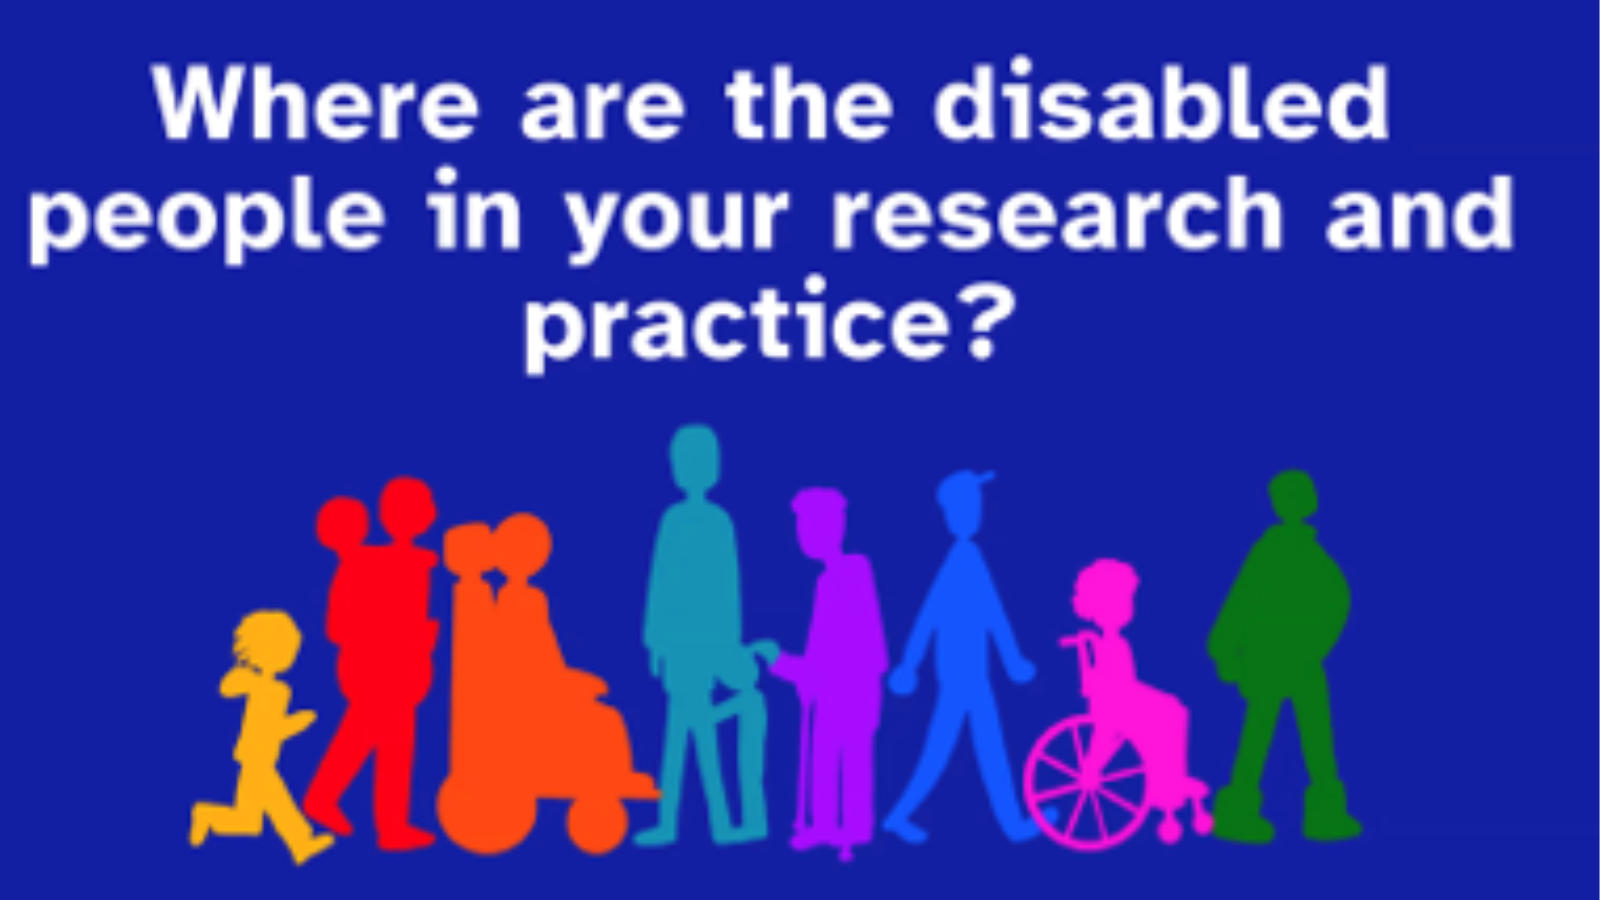 Where are the disabled people in your research and practice?